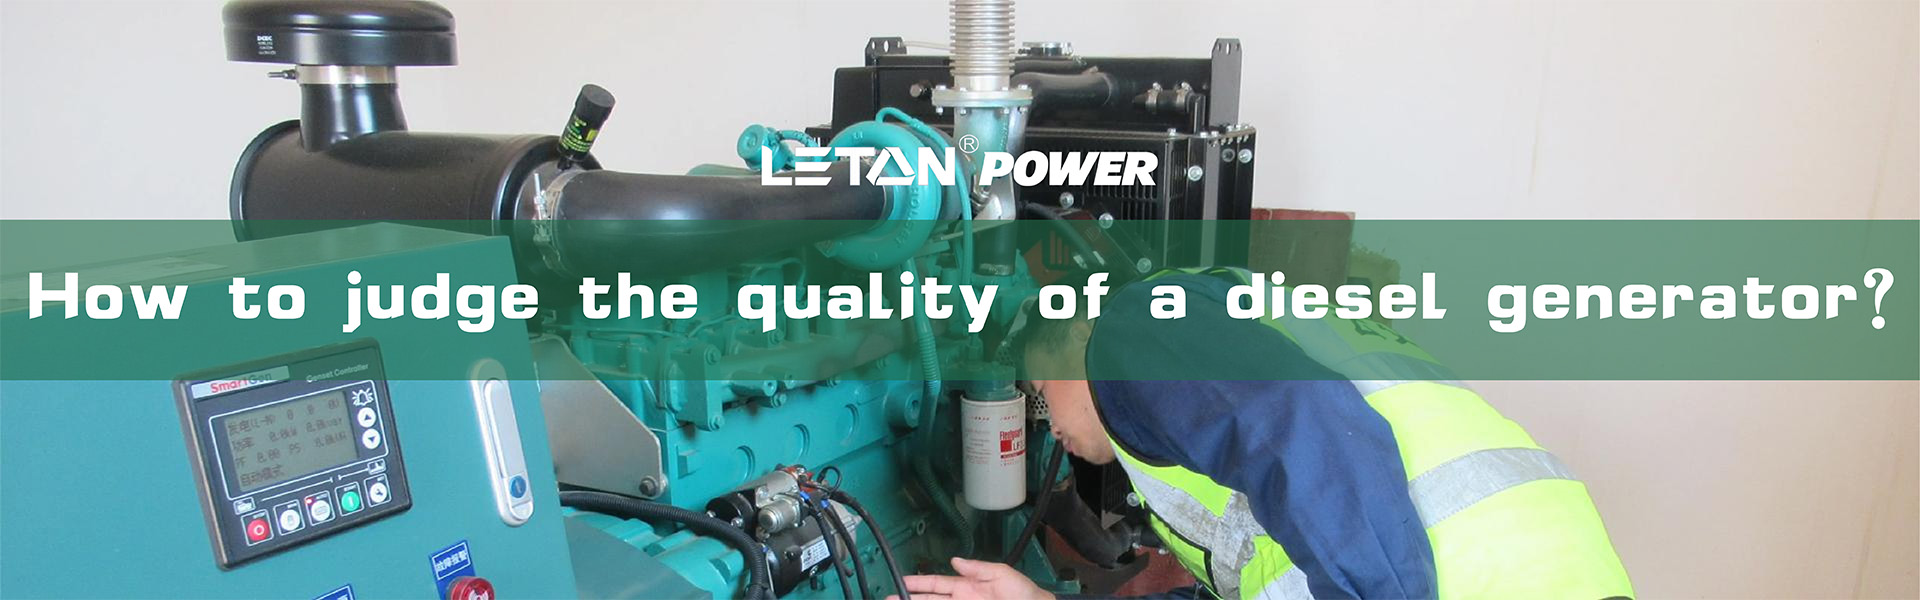 How to judge the quality of a diesel generator?